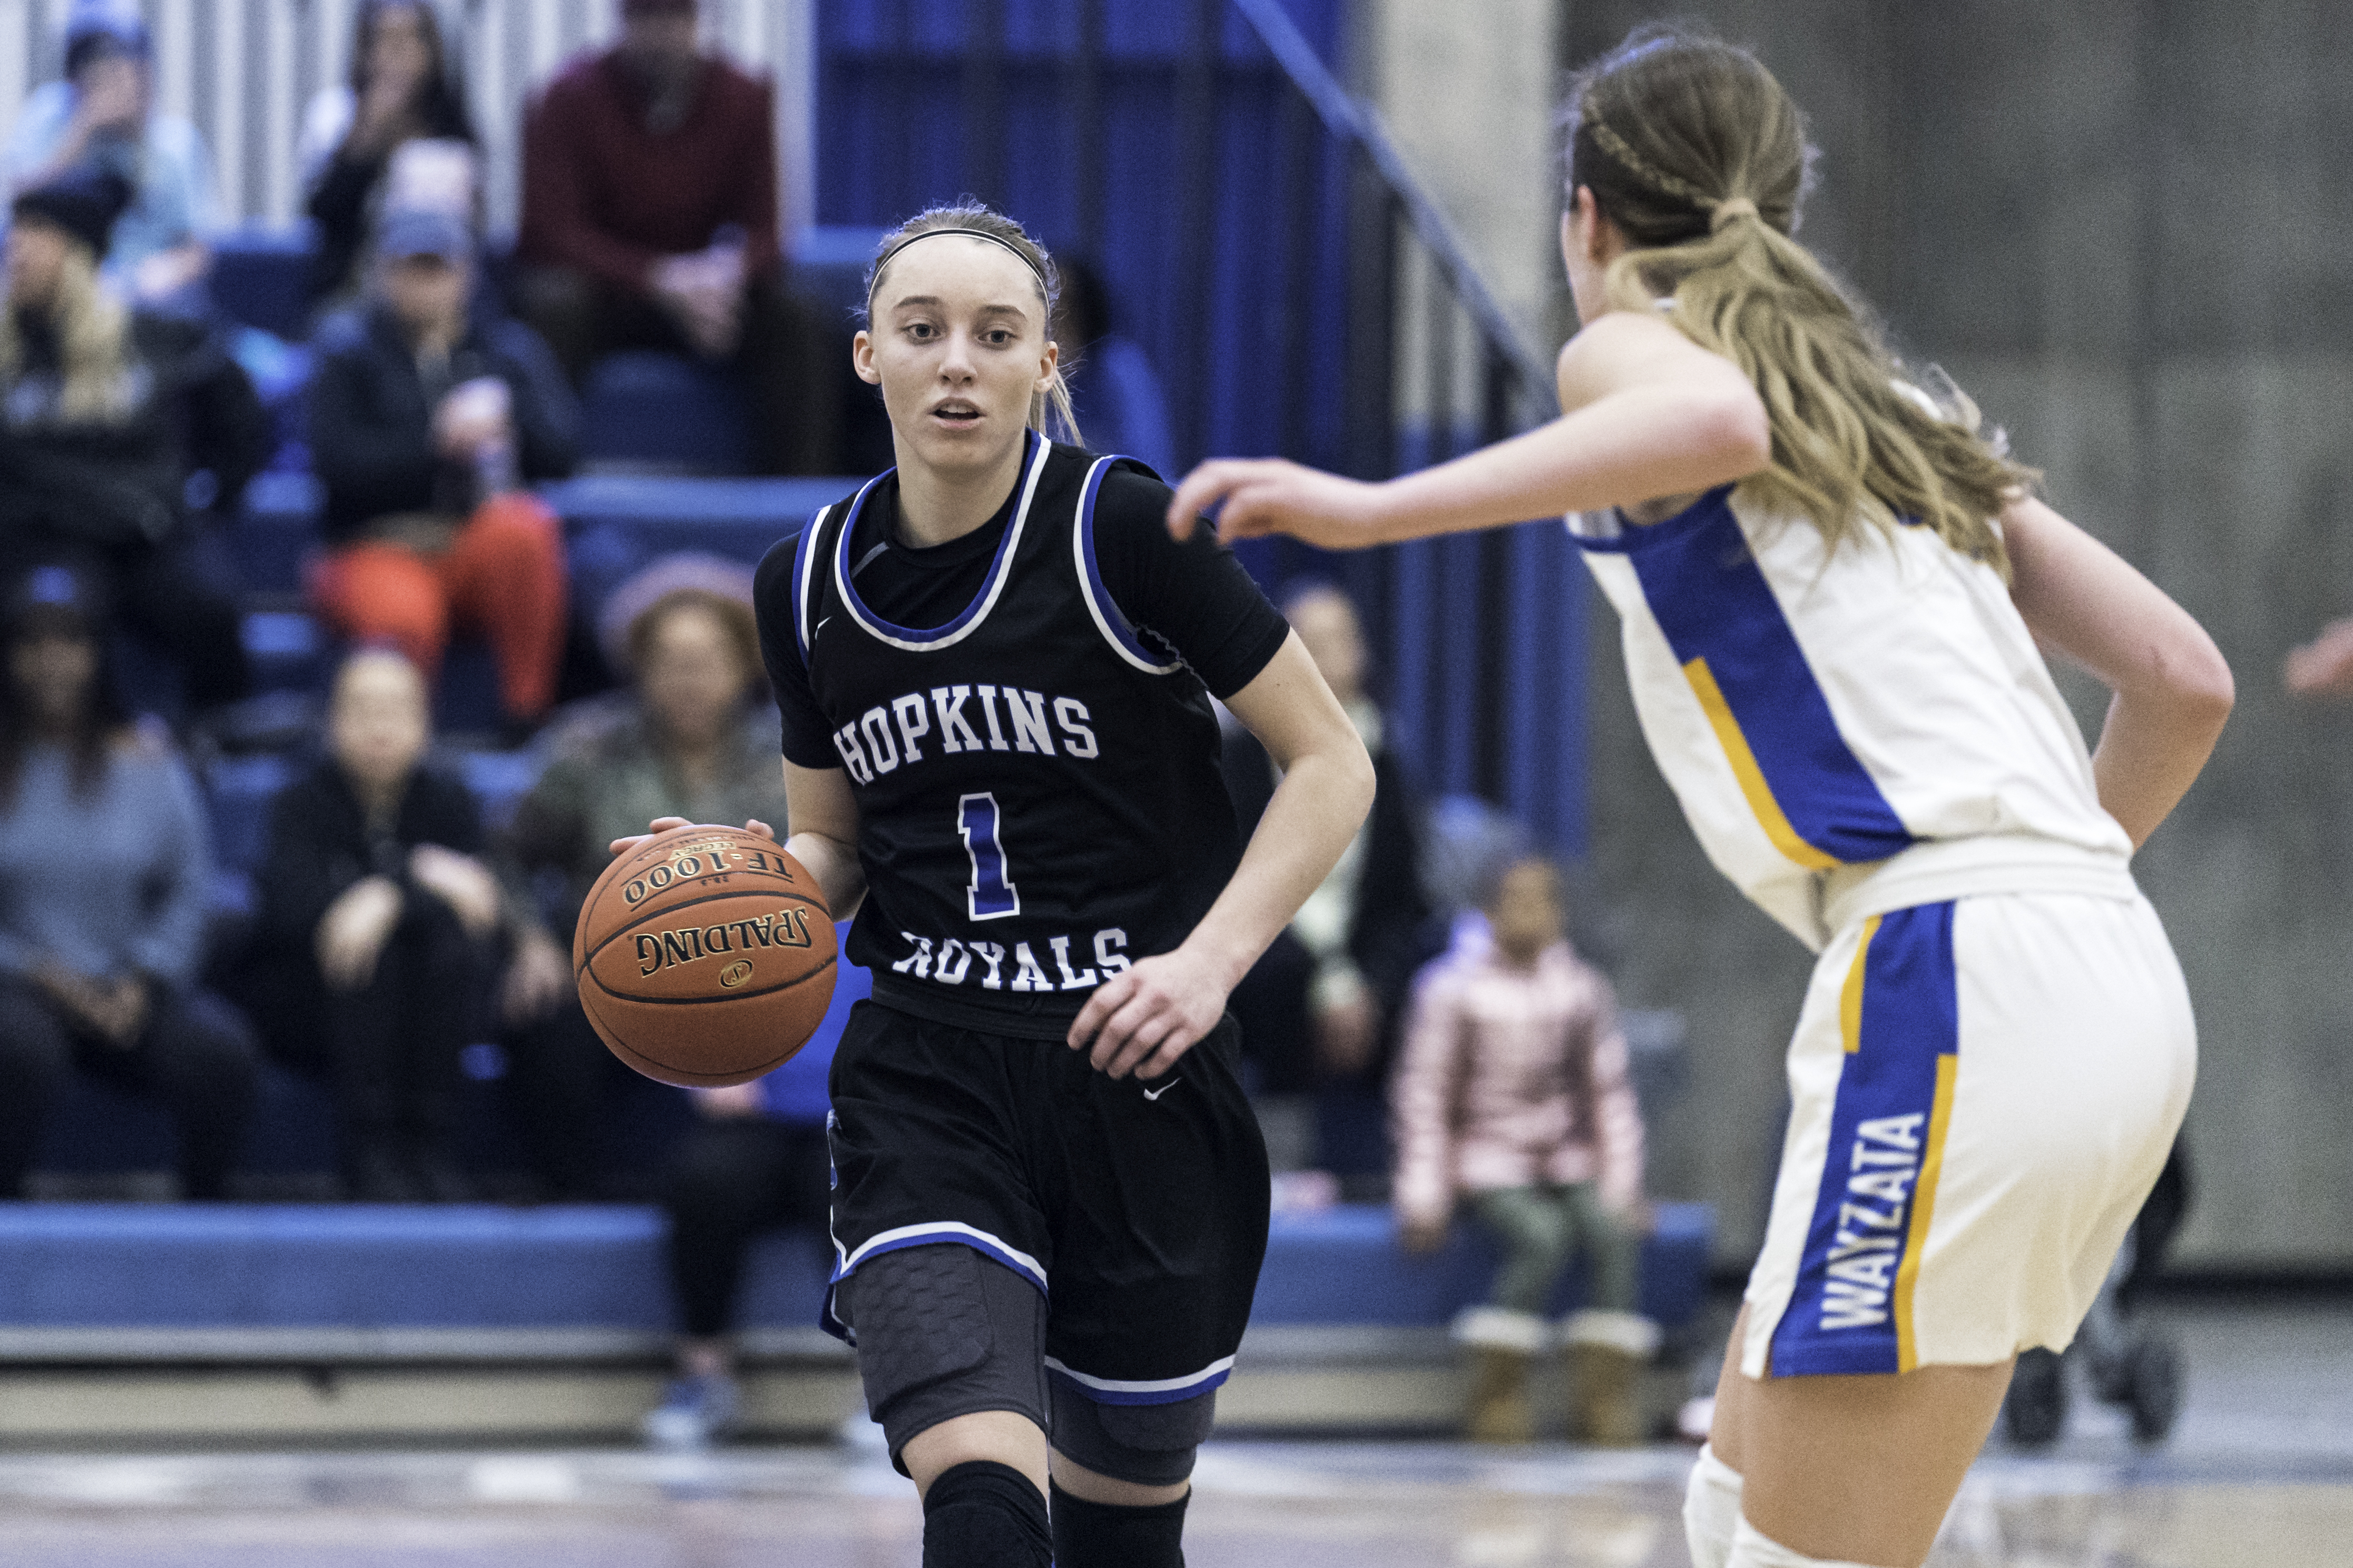 MSHSL - Hopkins High School's Paige Bueckers today was